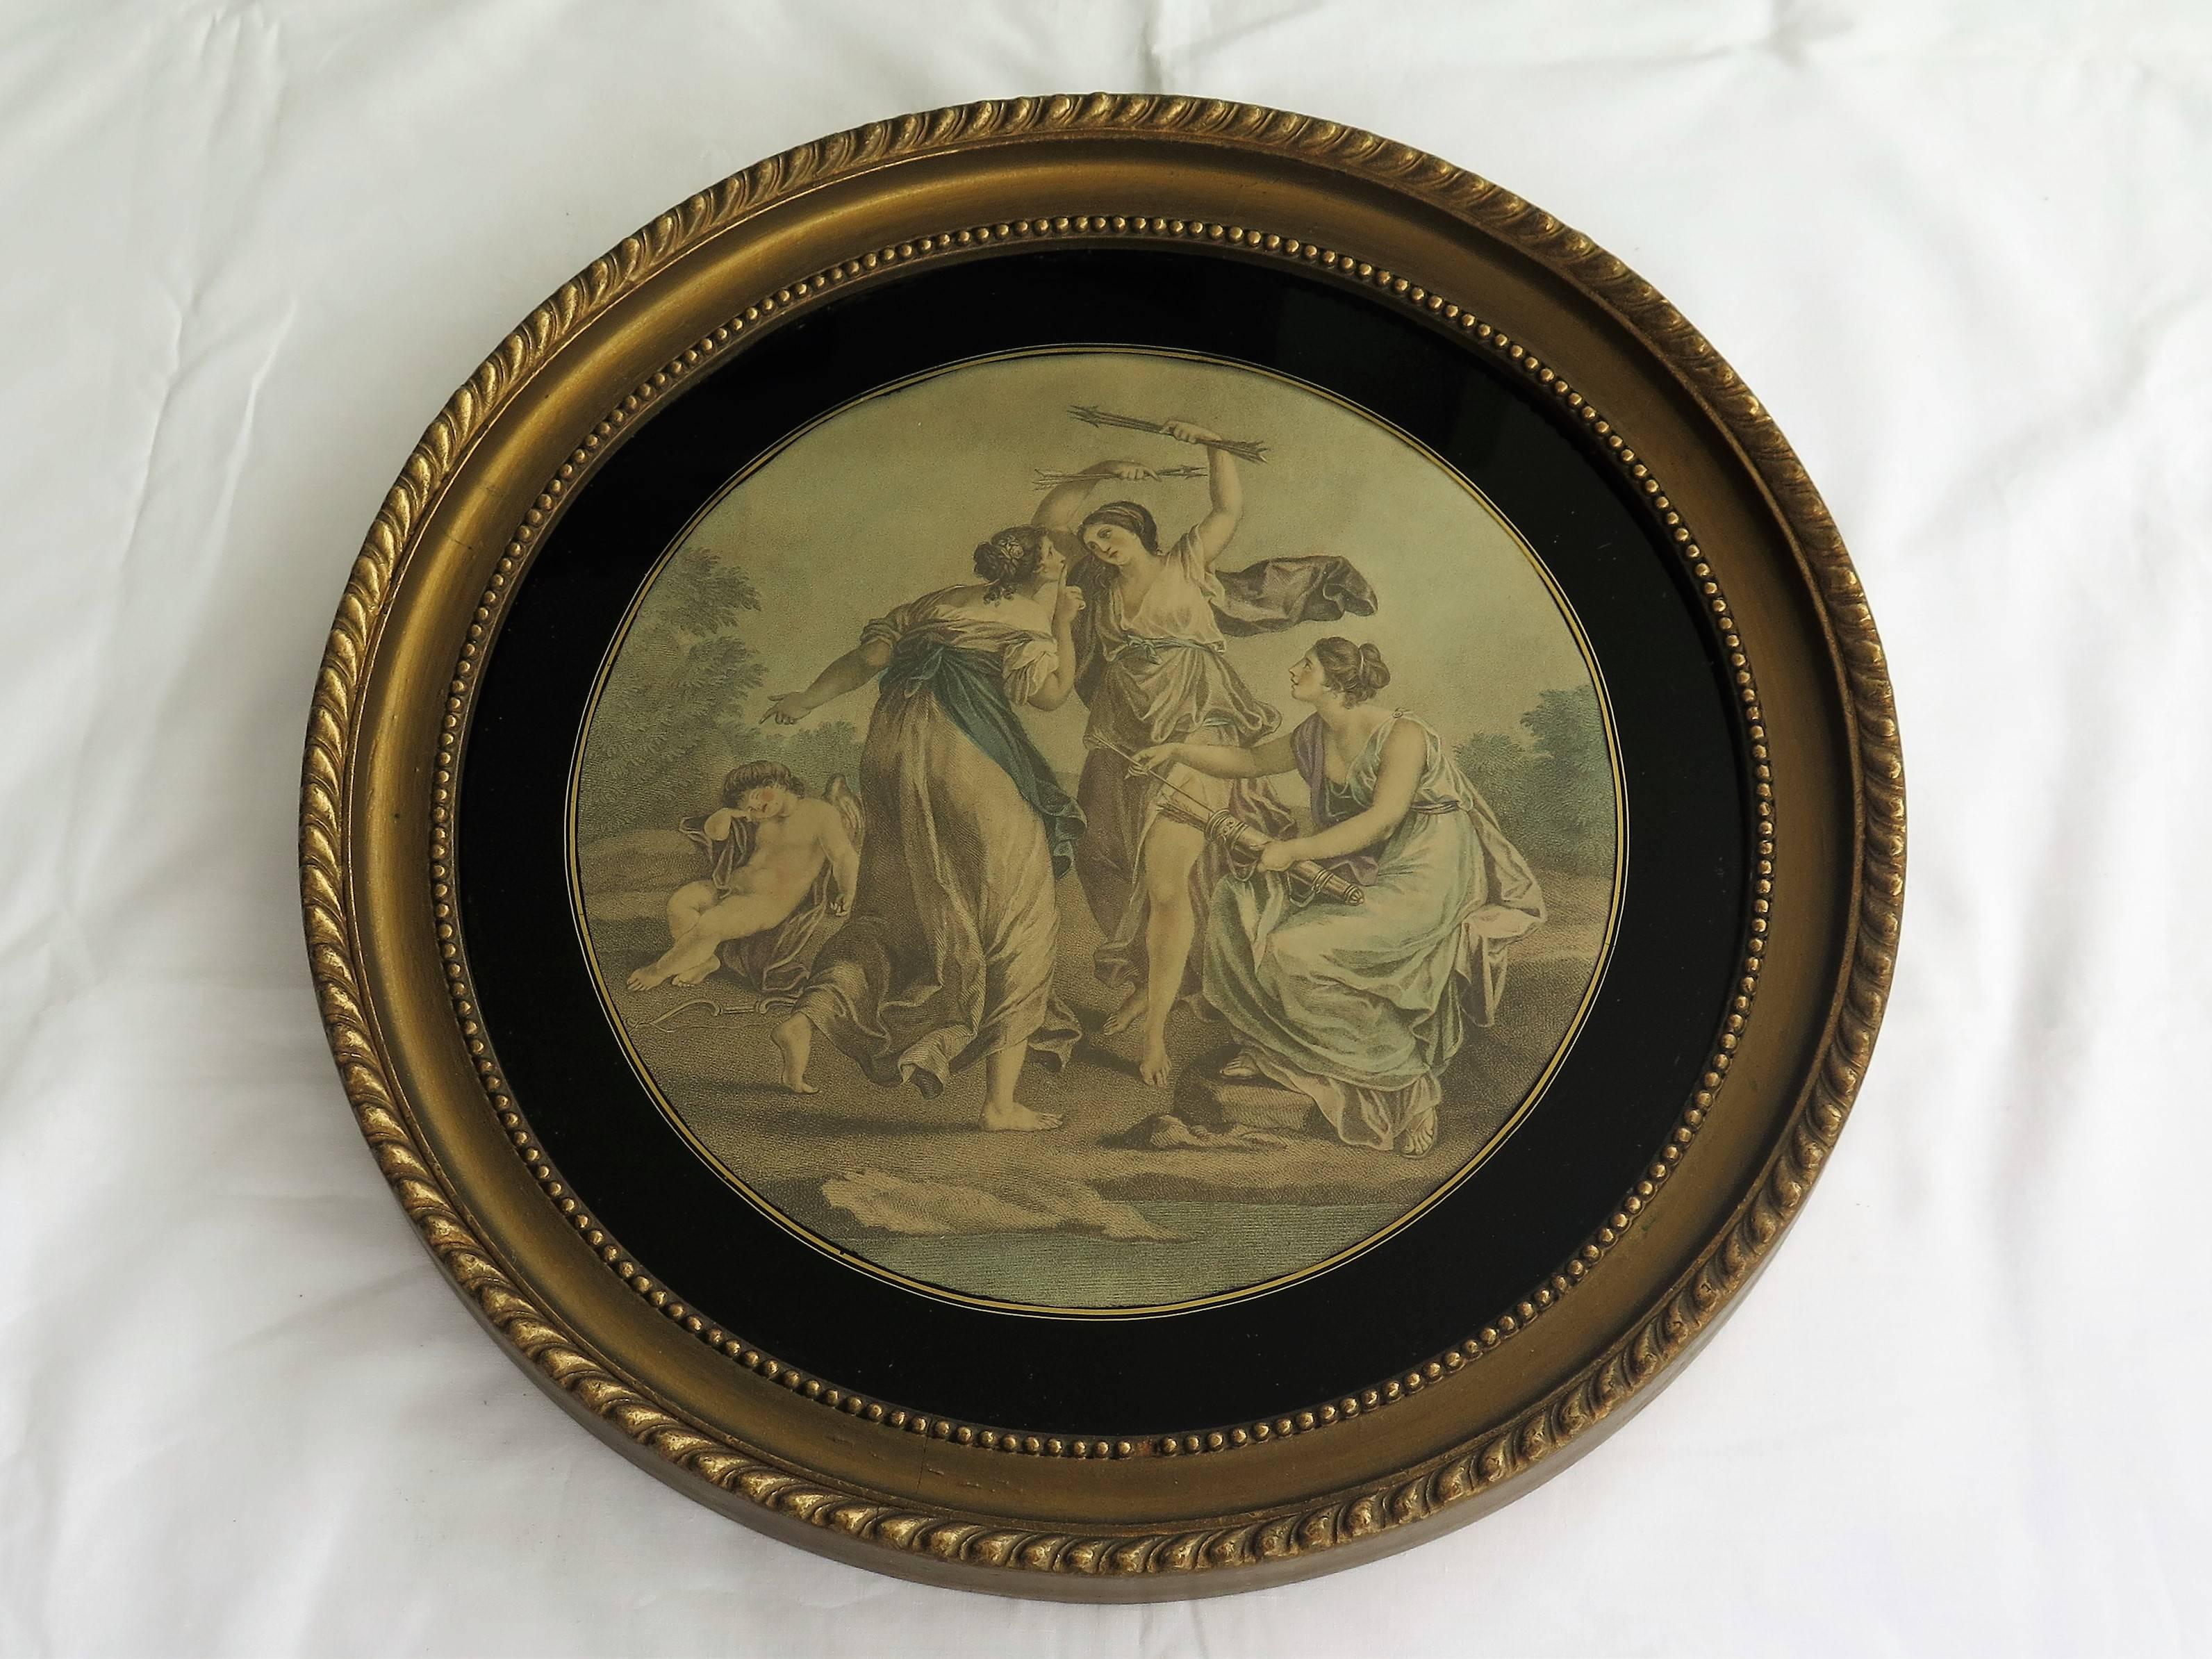 These are a very decorative pair of colored engravings or prints after Angelica Kauffmann, set in antique gold circular frames of a good size of 16.38 inch diameter and dating to the 19th century. These are prints or chromolithographs after the